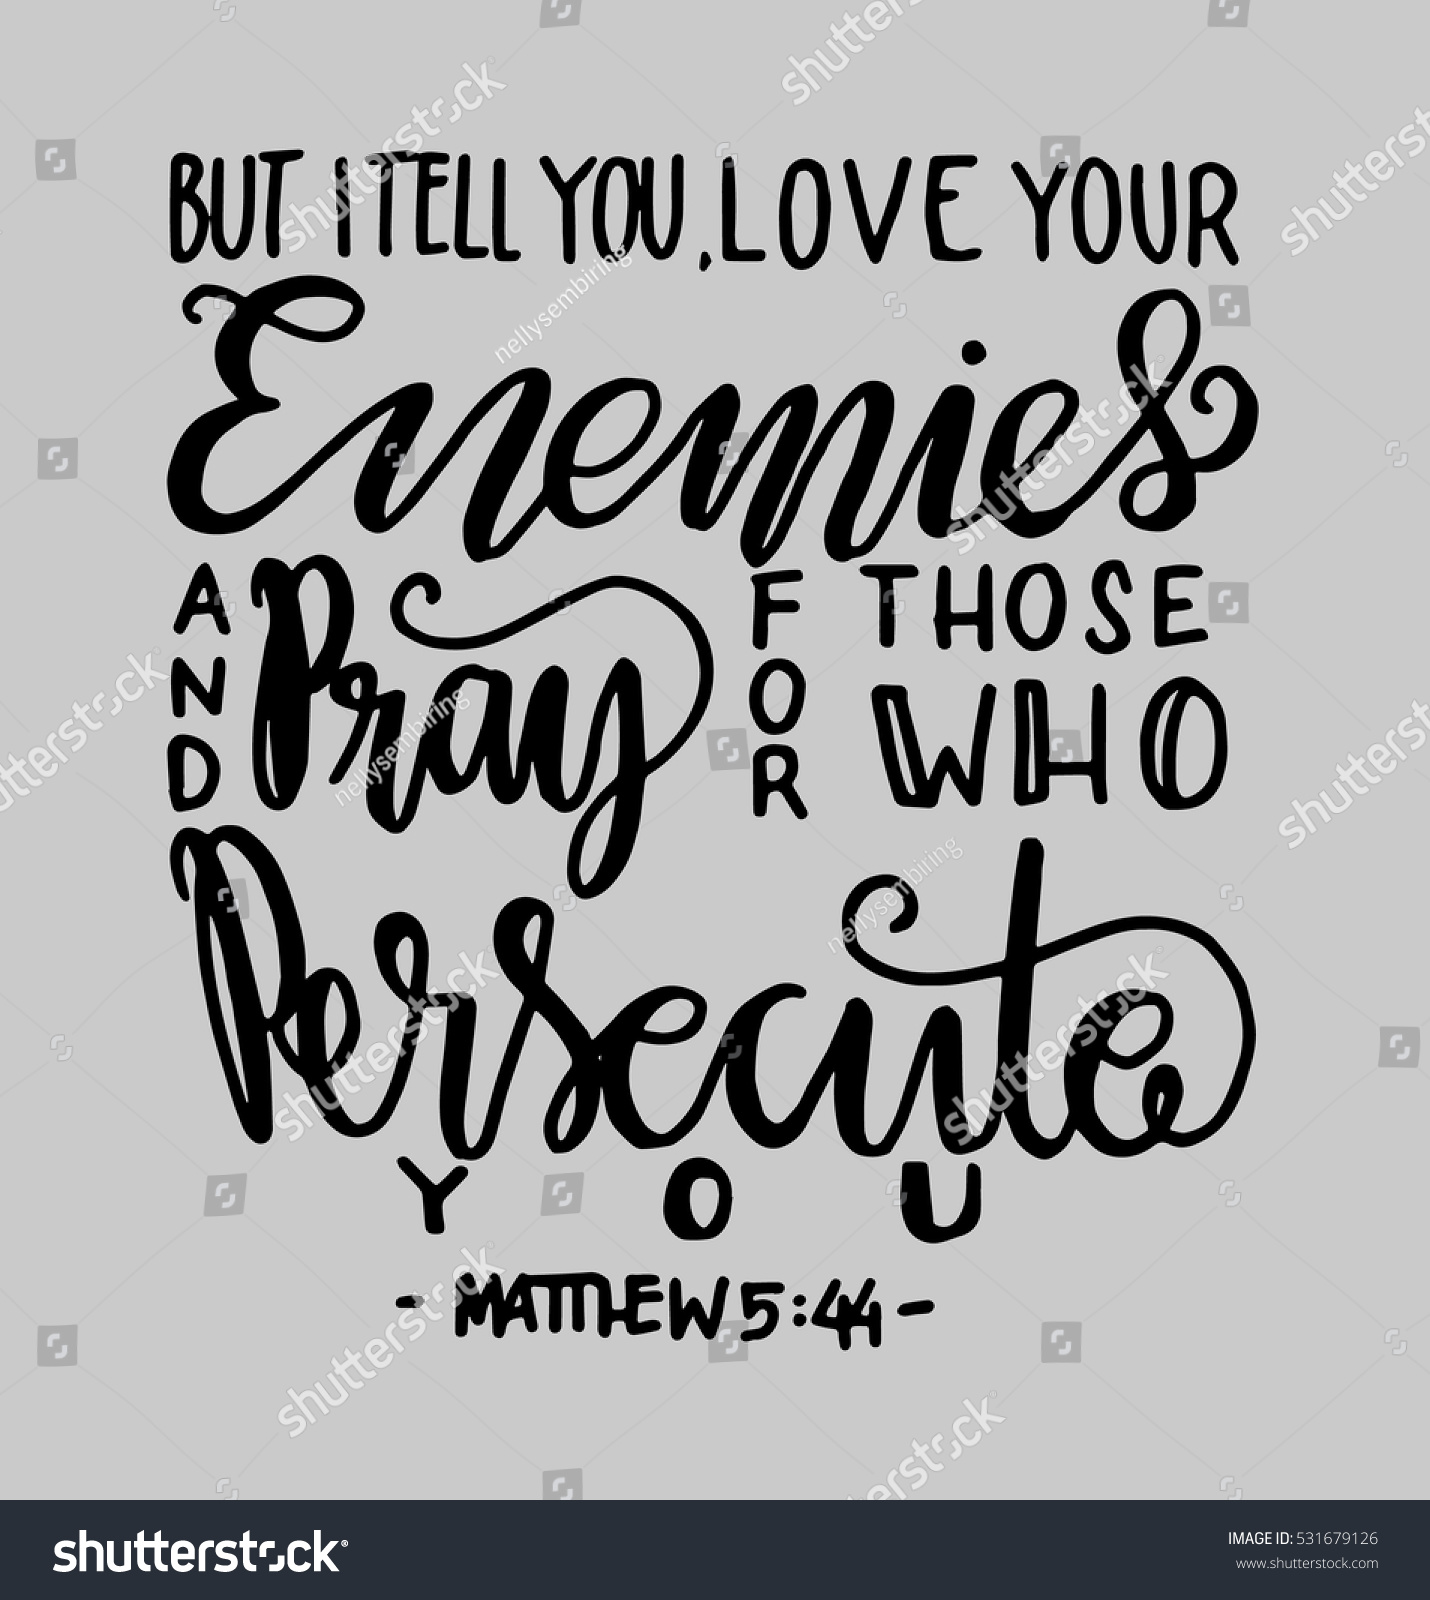 but i tell you love your enemies and pray for those who persecute you